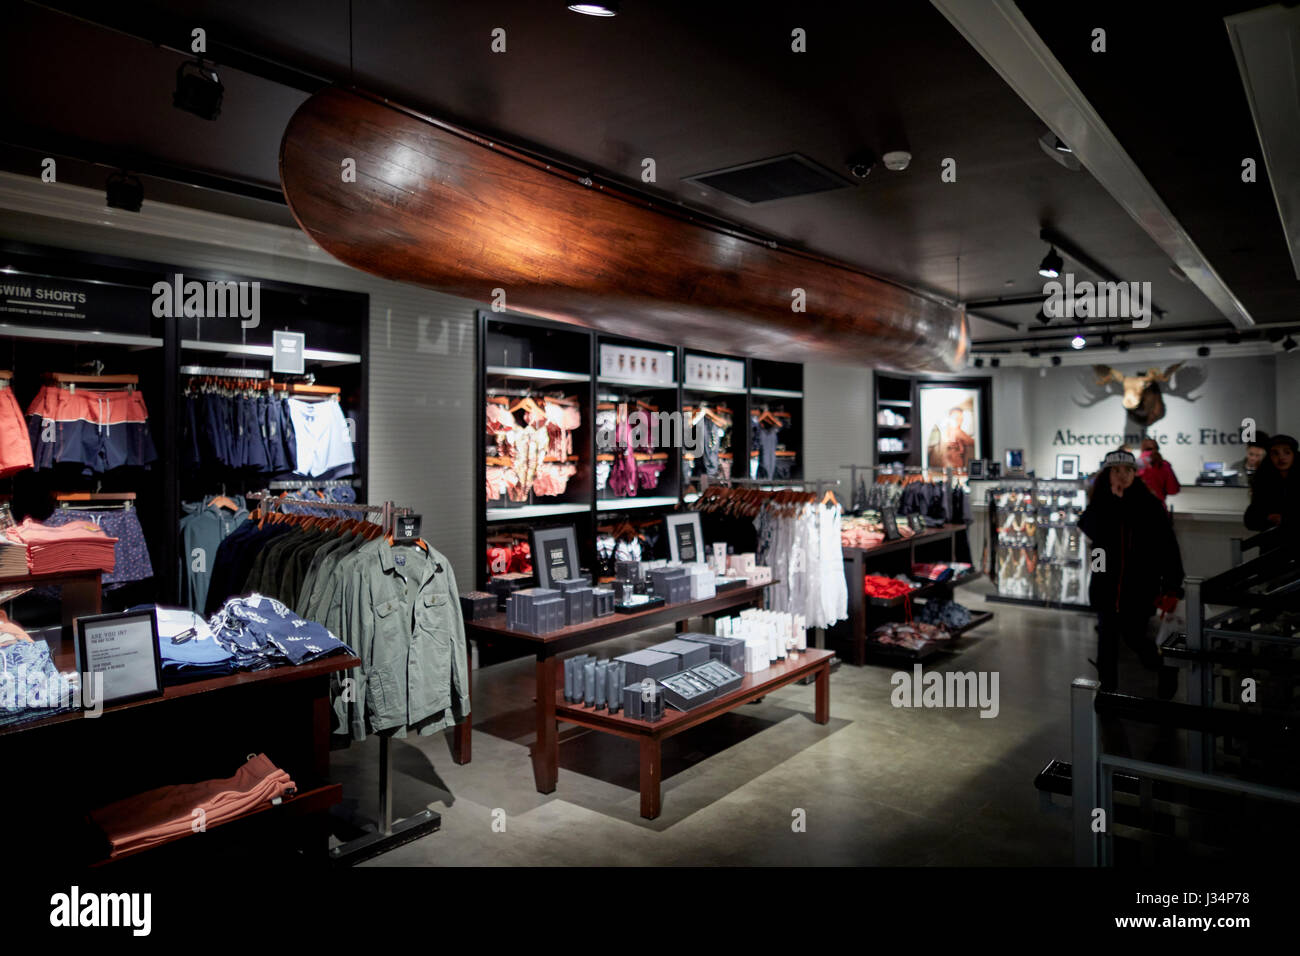 Abercrombie And Fitch High Resolution 